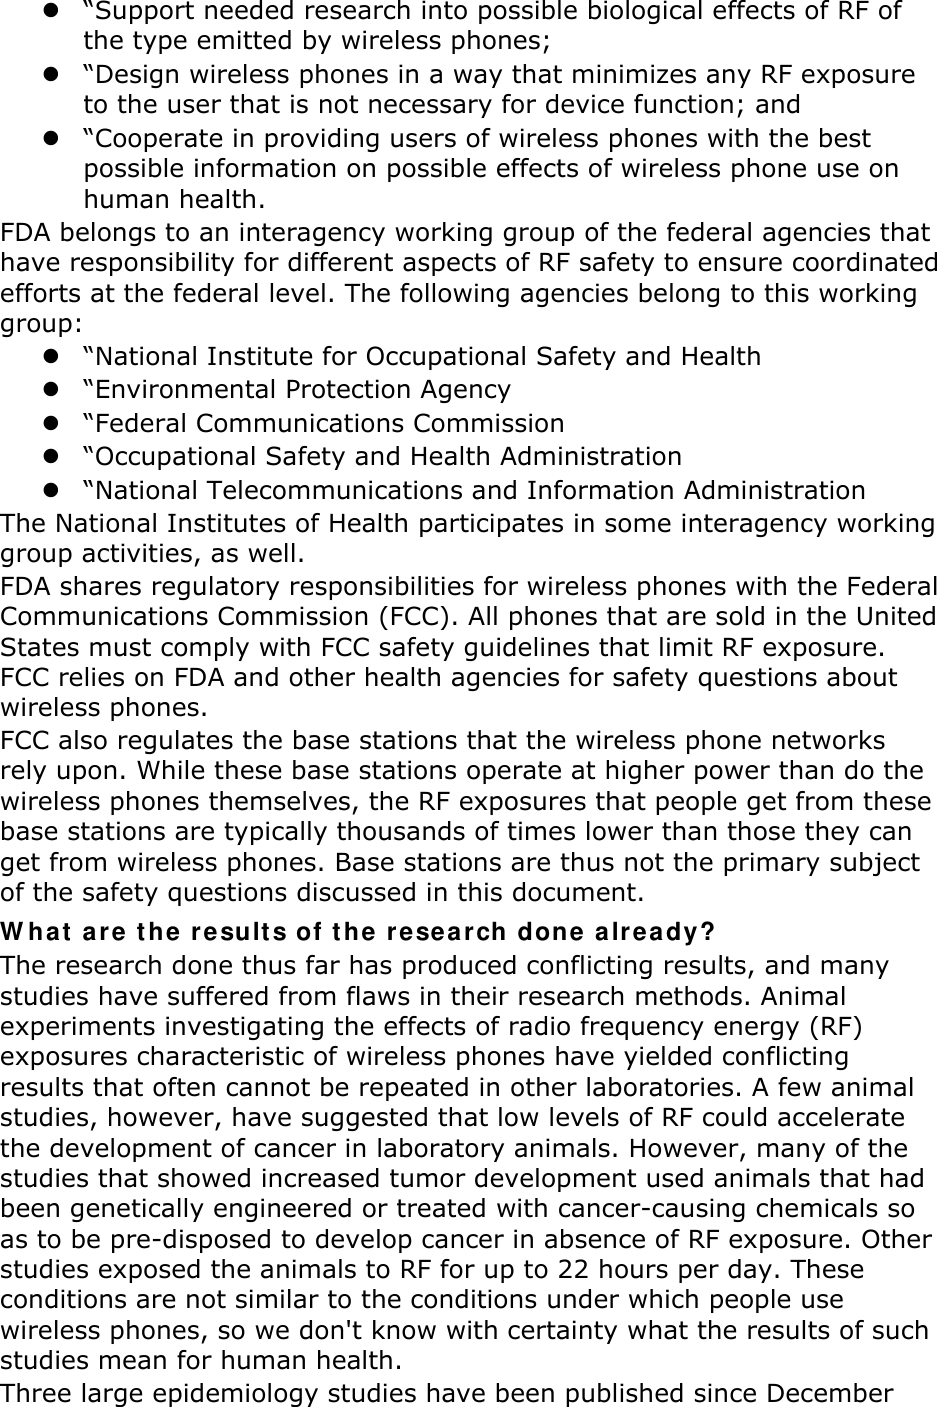 z “Support needed research into possible biological effects of RF of the type emitted by wireless phones; z “Design wireless phones in a way that minimizes any RF exposure to the user that is not necessary for device function; and z “Cooperate in providing users of wireless phones with the best possible information on possible effects of wireless phone use on human health. FDA belongs to an interagency working group of the federal agencies that have responsibility for different aspects of RF safety to ensure coordinated efforts at the federal level. The following agencies belong to this working group: z “National Institute for Occupational Safety and Health z “Environmental Protection Agency z “Federal Communications Commission z “Occupational Safety and Health Administration z “National Telecommunications and Information Administration The National Institutes of Health participates in some interagency working group activities, as well. FDA shares regulatory responsibilities for wireless phones with the Federal Communications Commission (FCC). All phones that are sold in the United States must comply with FCC safety guidelines that limit RF exposure. FCC relies on FDA and other health agencies for safety questions about wireless phones. FCC also regulates the base stations that the wireless phone networks rely upon. While these base stations operate at higher power than do the wireless phones themselves, the RF exposures that people get from these base stations are typically thousands of times lower than those they can get from wireless phones. Base stations are thus not the primary subject of the safety questions discussed in this document. What are the results of the research done already? The research done thus far has produced conflicting results, and many studies have suffered from flaws in their research methods. Animal experiments investigating the effects of radio frequency energy (RF) exposures characteristic of wireless phones have yielded conflicting results that often cannot be repeated in other laboratories. A few animal studies, however, have suggested that low levels of RF could accelerate the development of cancer in laboratory animals. However, many of the studies that showed increased tumor development used animals that had been genetically engineered or treated with cancer-causing chemicals so as to be pre-disposed to develop cancer in absence of RF exposure. Other studies exposed the animals to RF for up to 22 hours per day. These conditions are not similar to the conditions under which people use wireless phones, so we don&apos;t know with certainty what the results of such studies mean for human health. Three large epidemiology studies have been published since December 